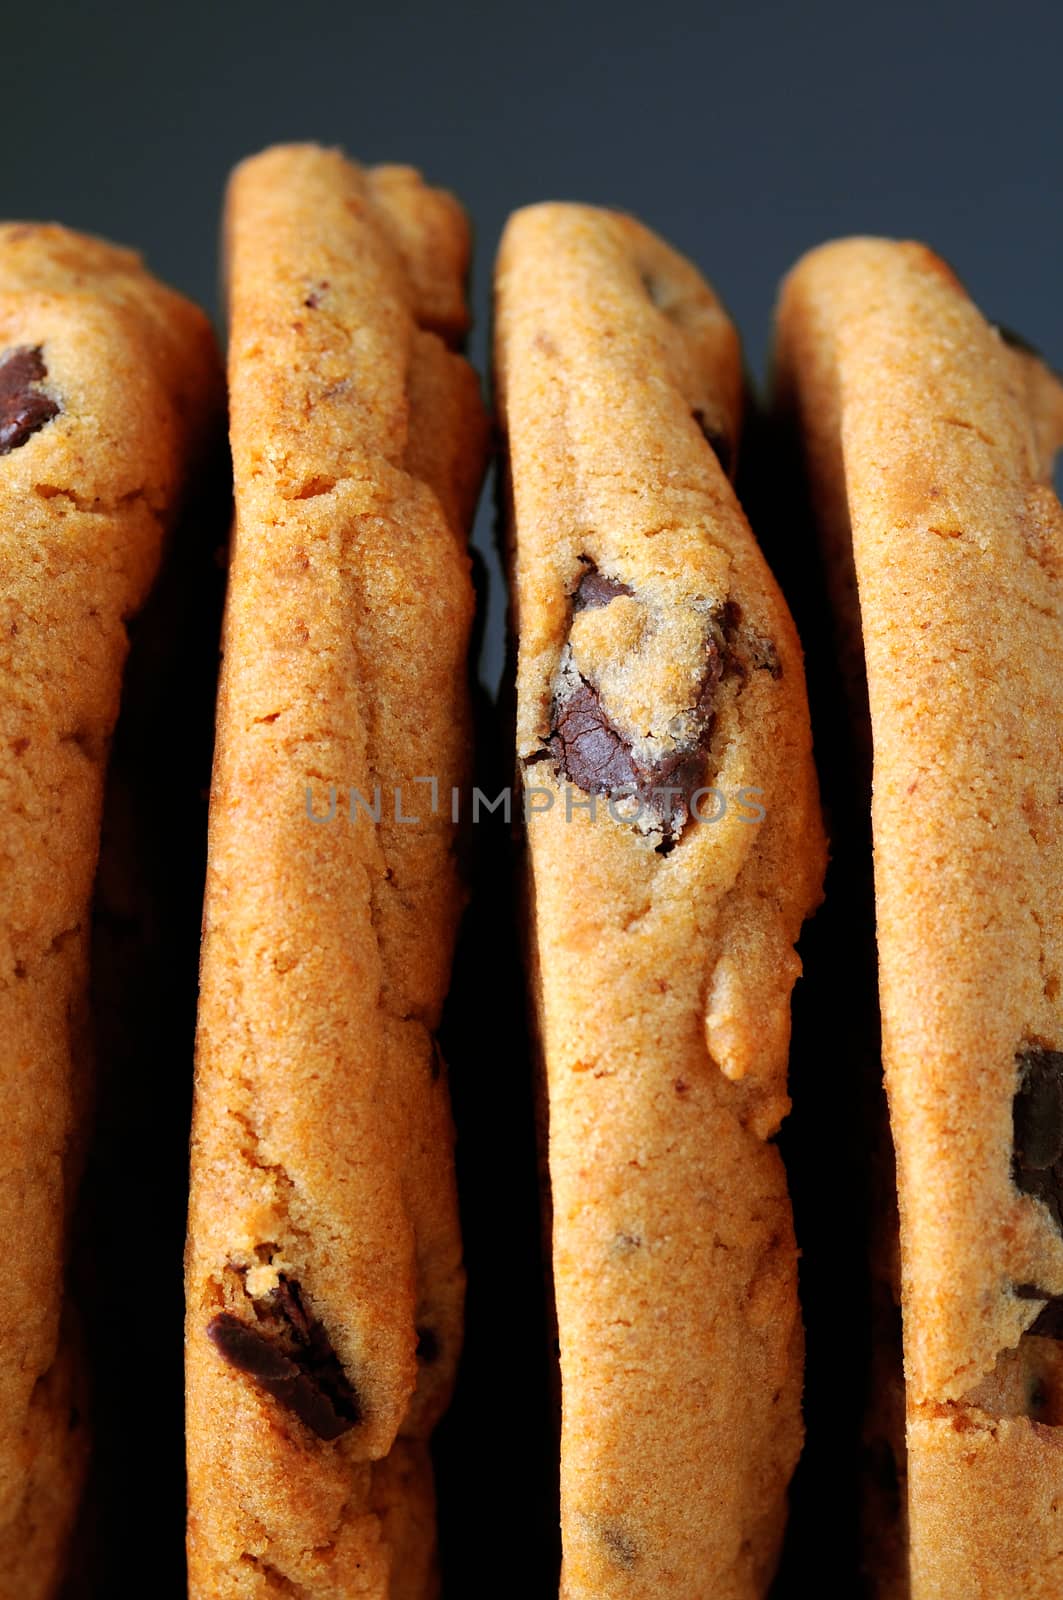 Closeup of chocolate chip cookies standing on their sides.